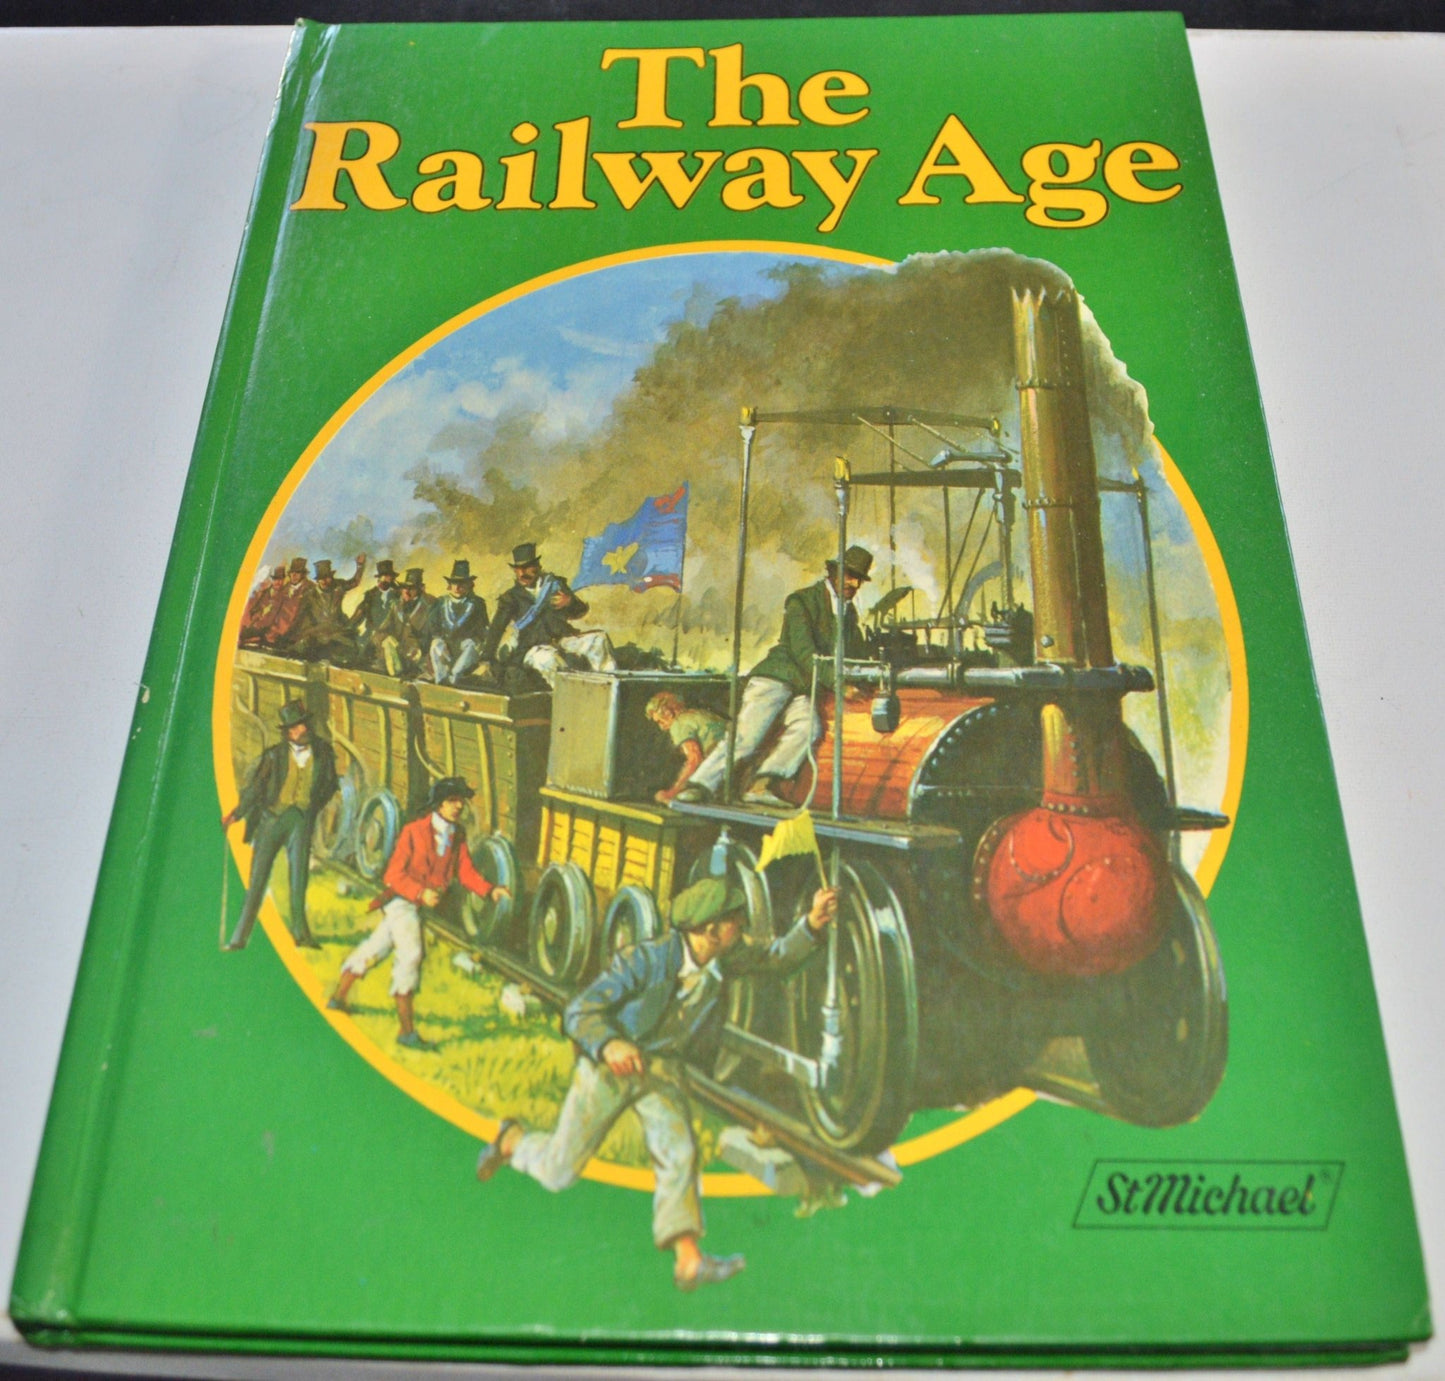 SECONDHAND BOOK THE RAILWAY AGE(PREVIOUSLY OWNED)GOOD CONDITION - TMD167207